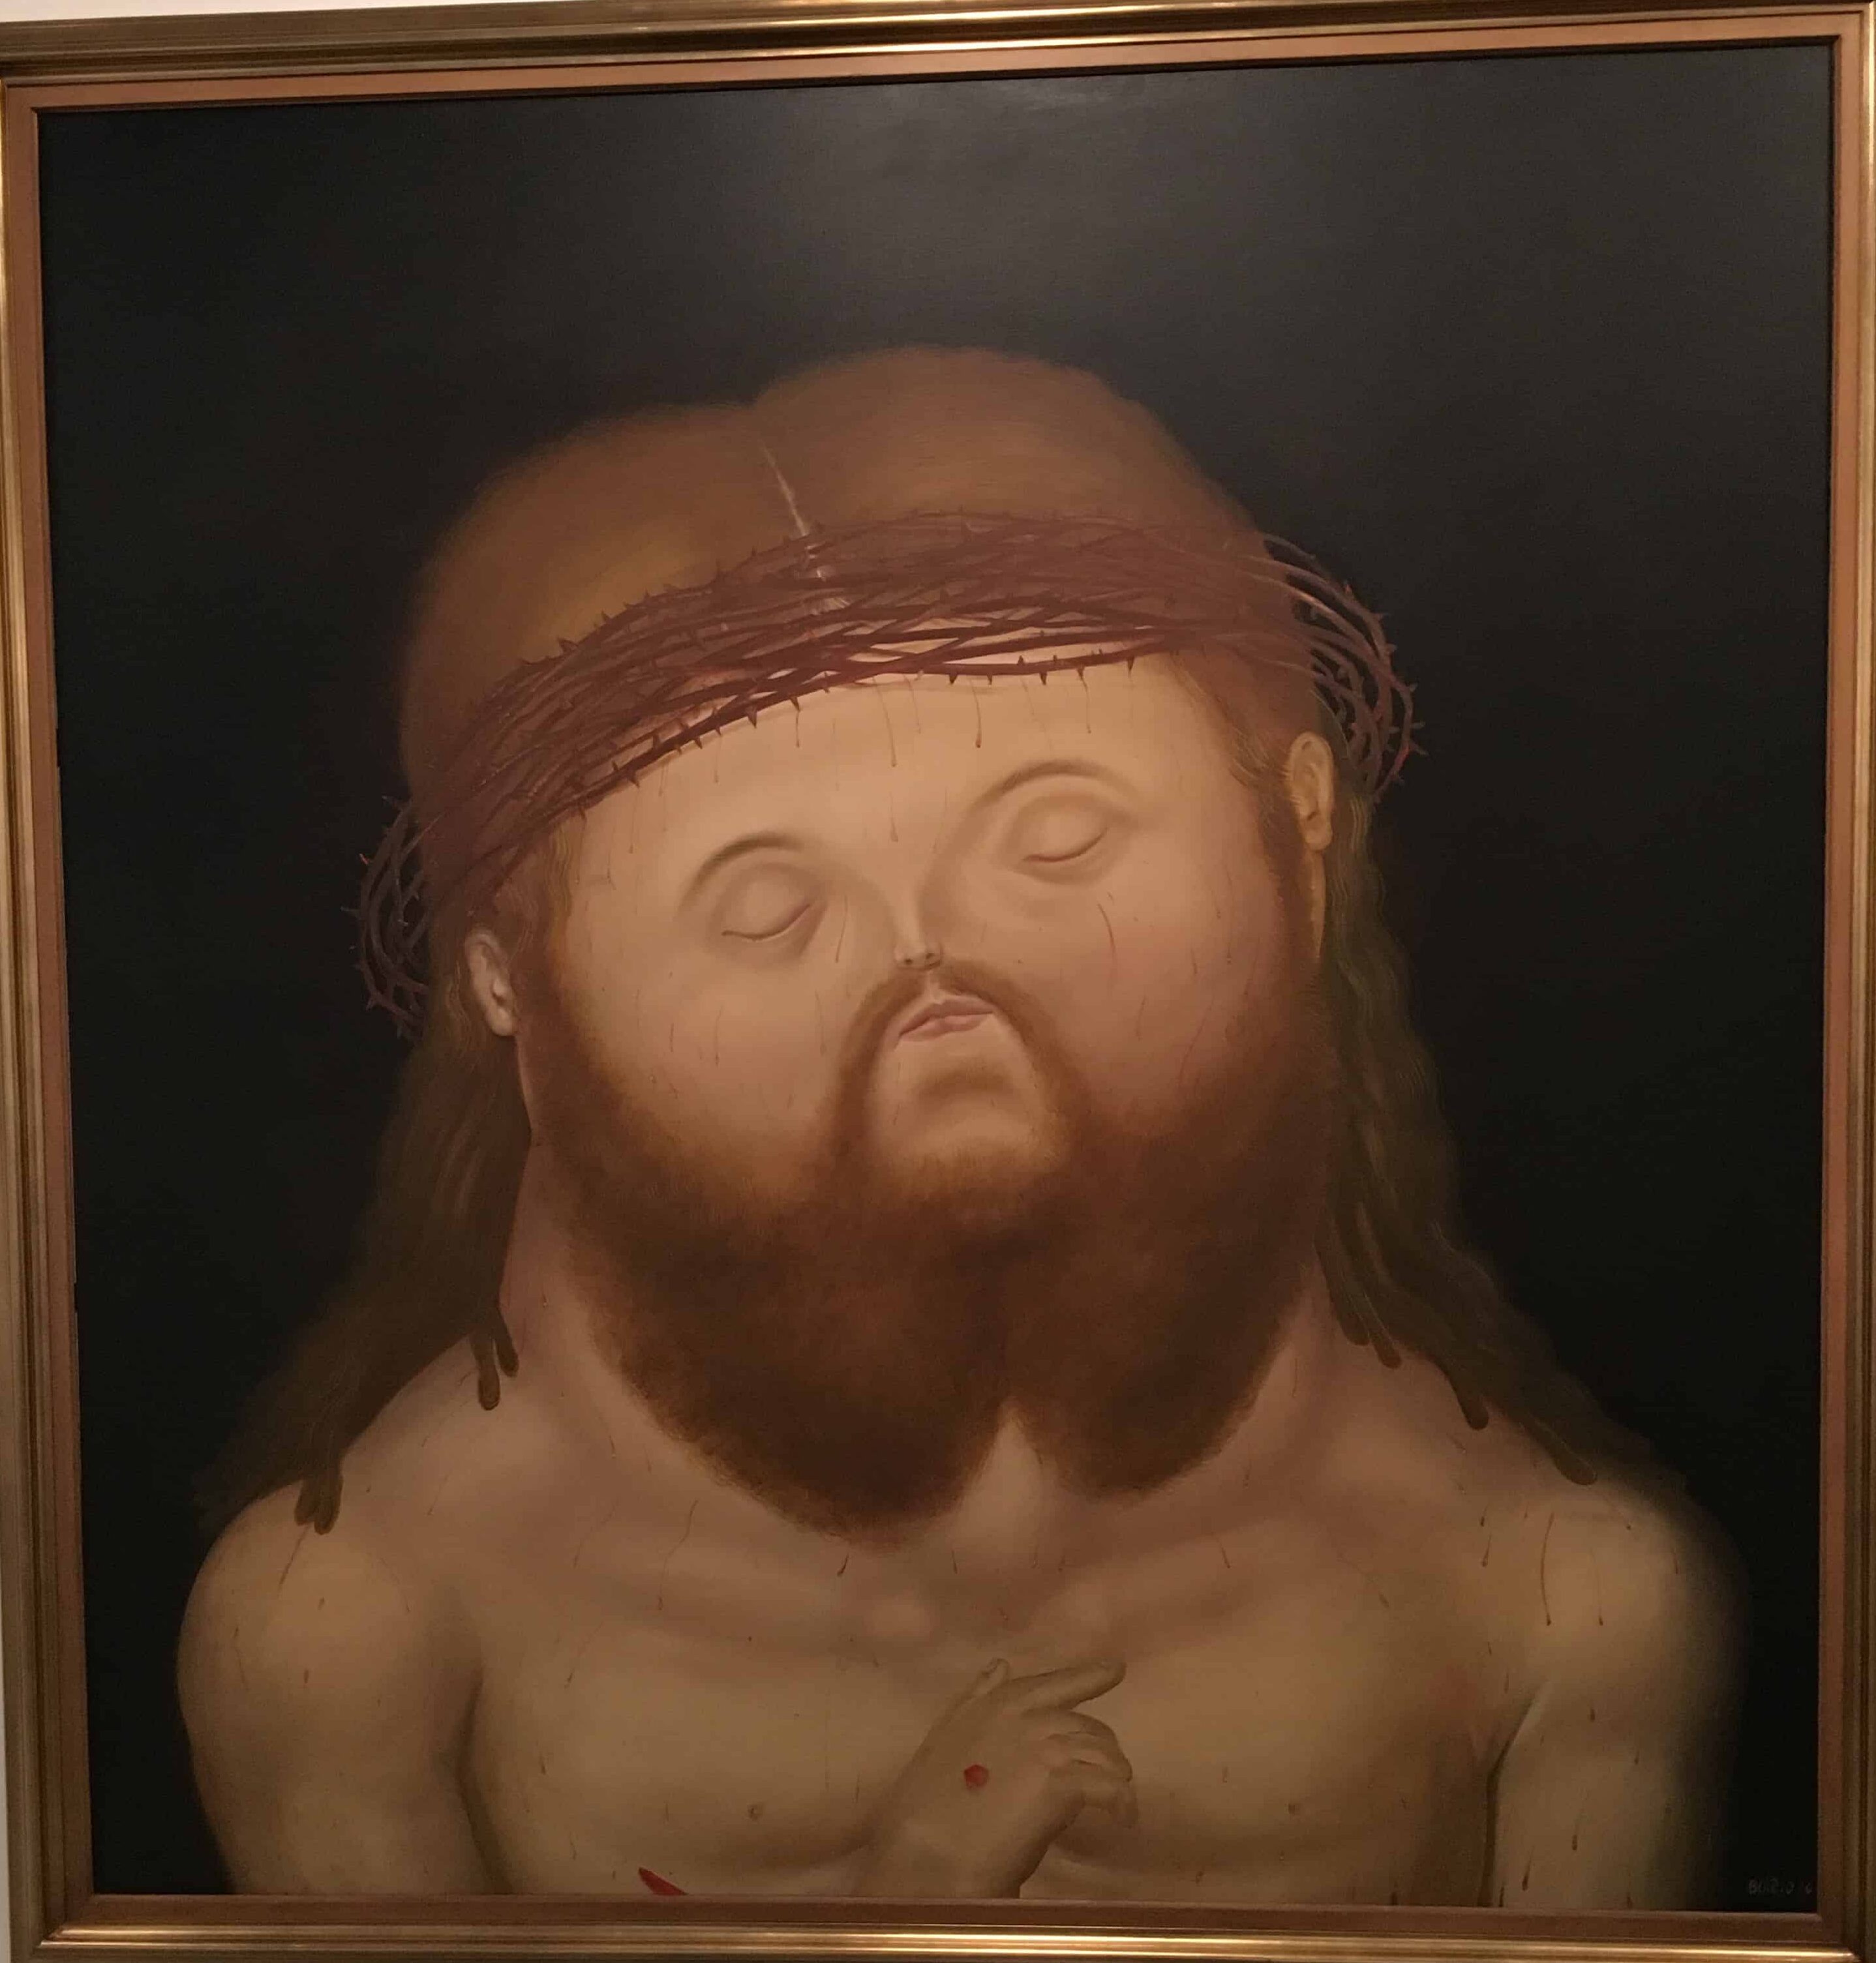 Botero's Christ at the Antioquia Museum in Medellín, Colombia